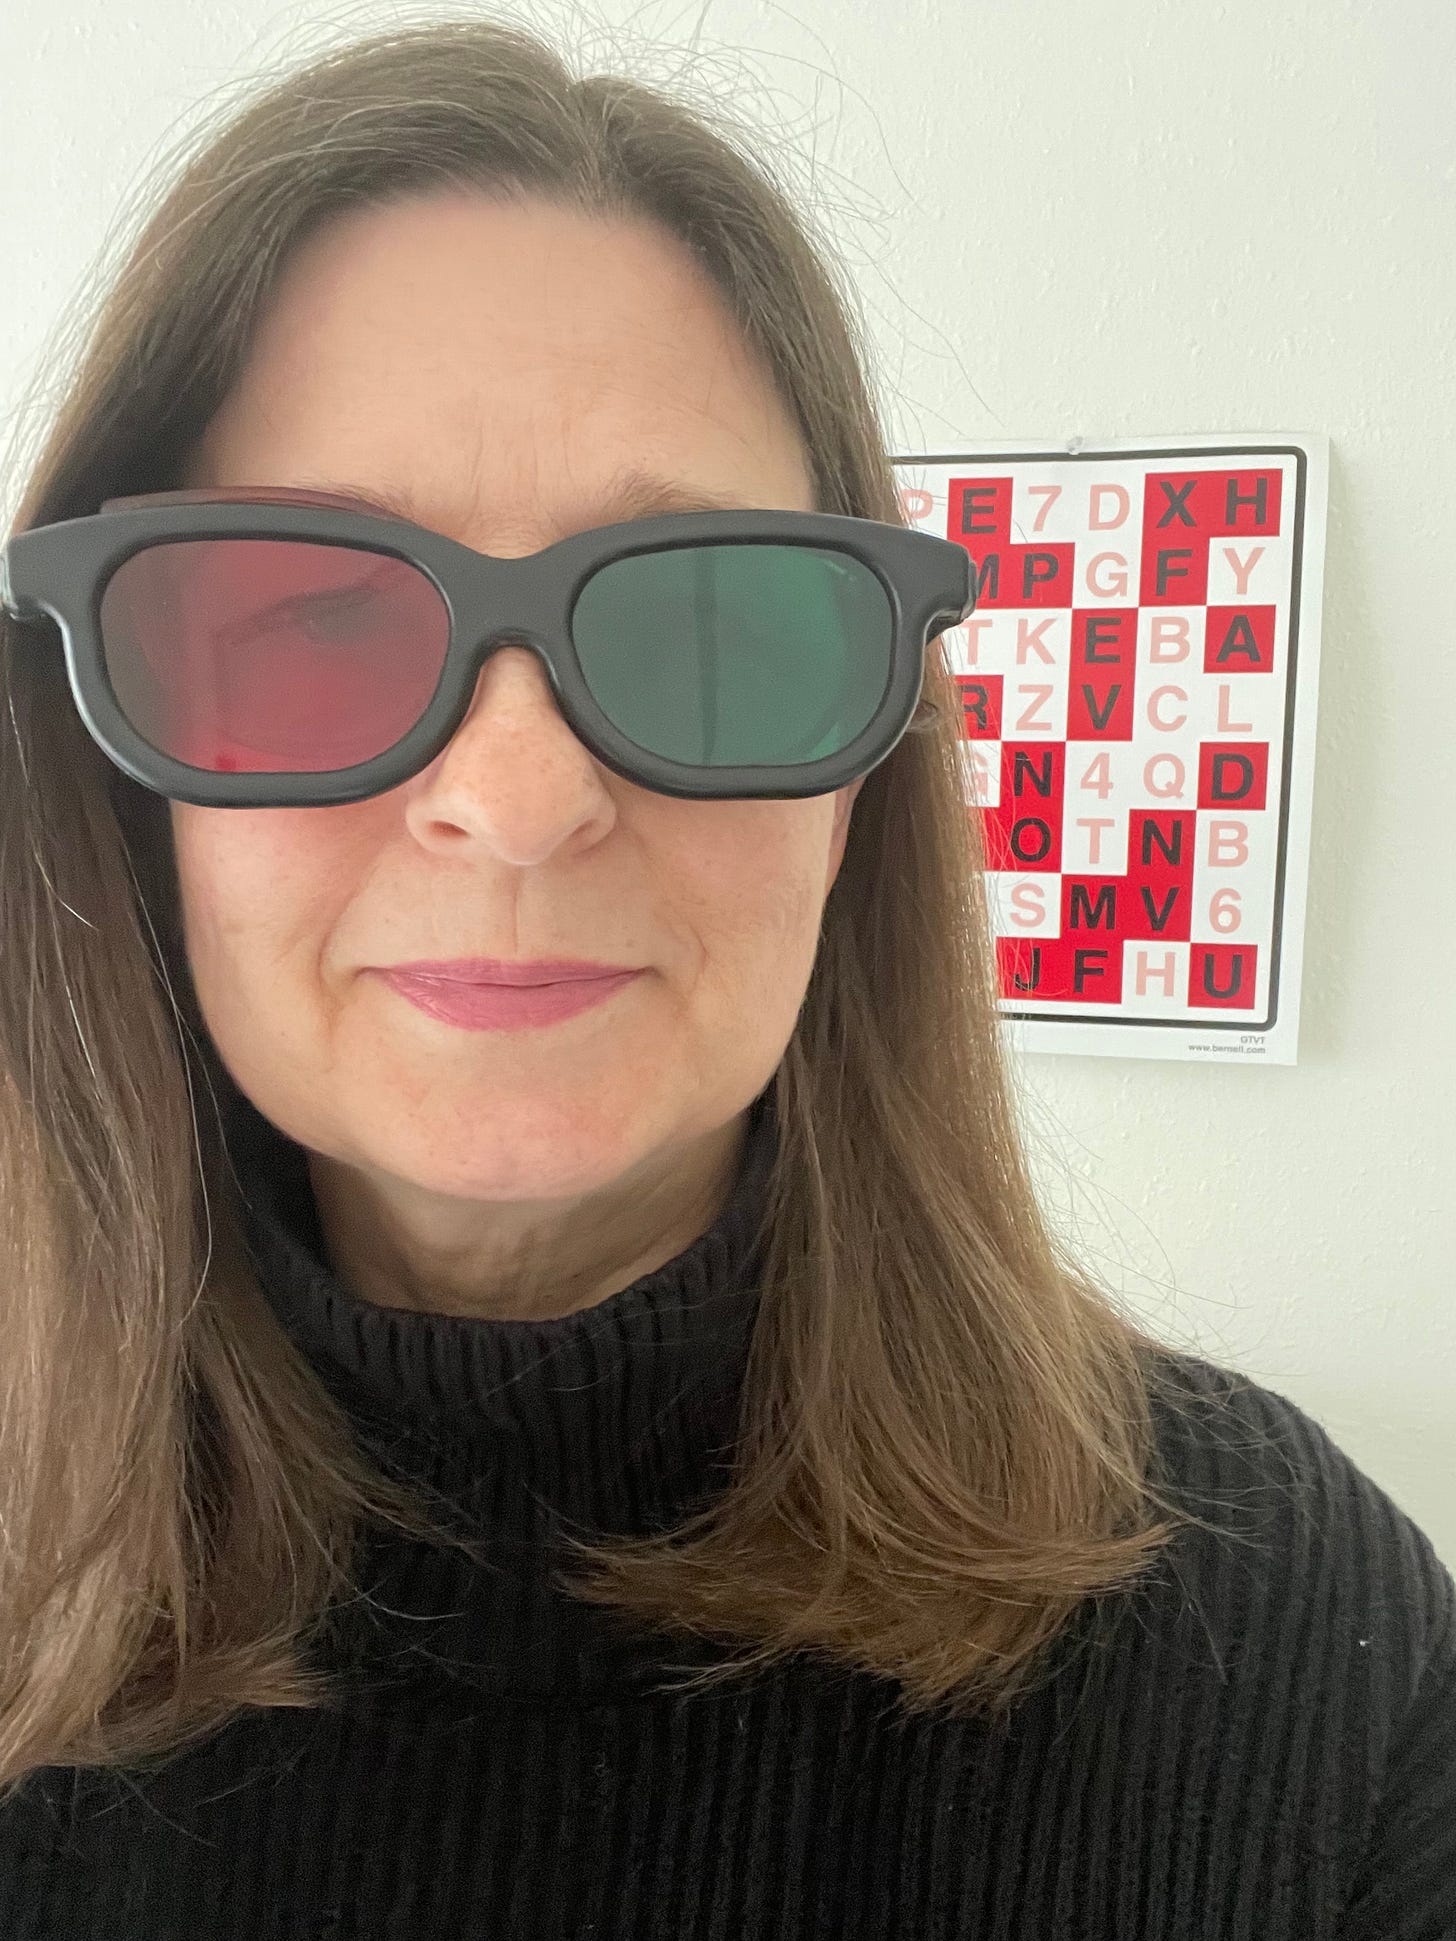 Woman standing in front of eye chart, wearing glasses. One lens of glasses is red, and the other is green.